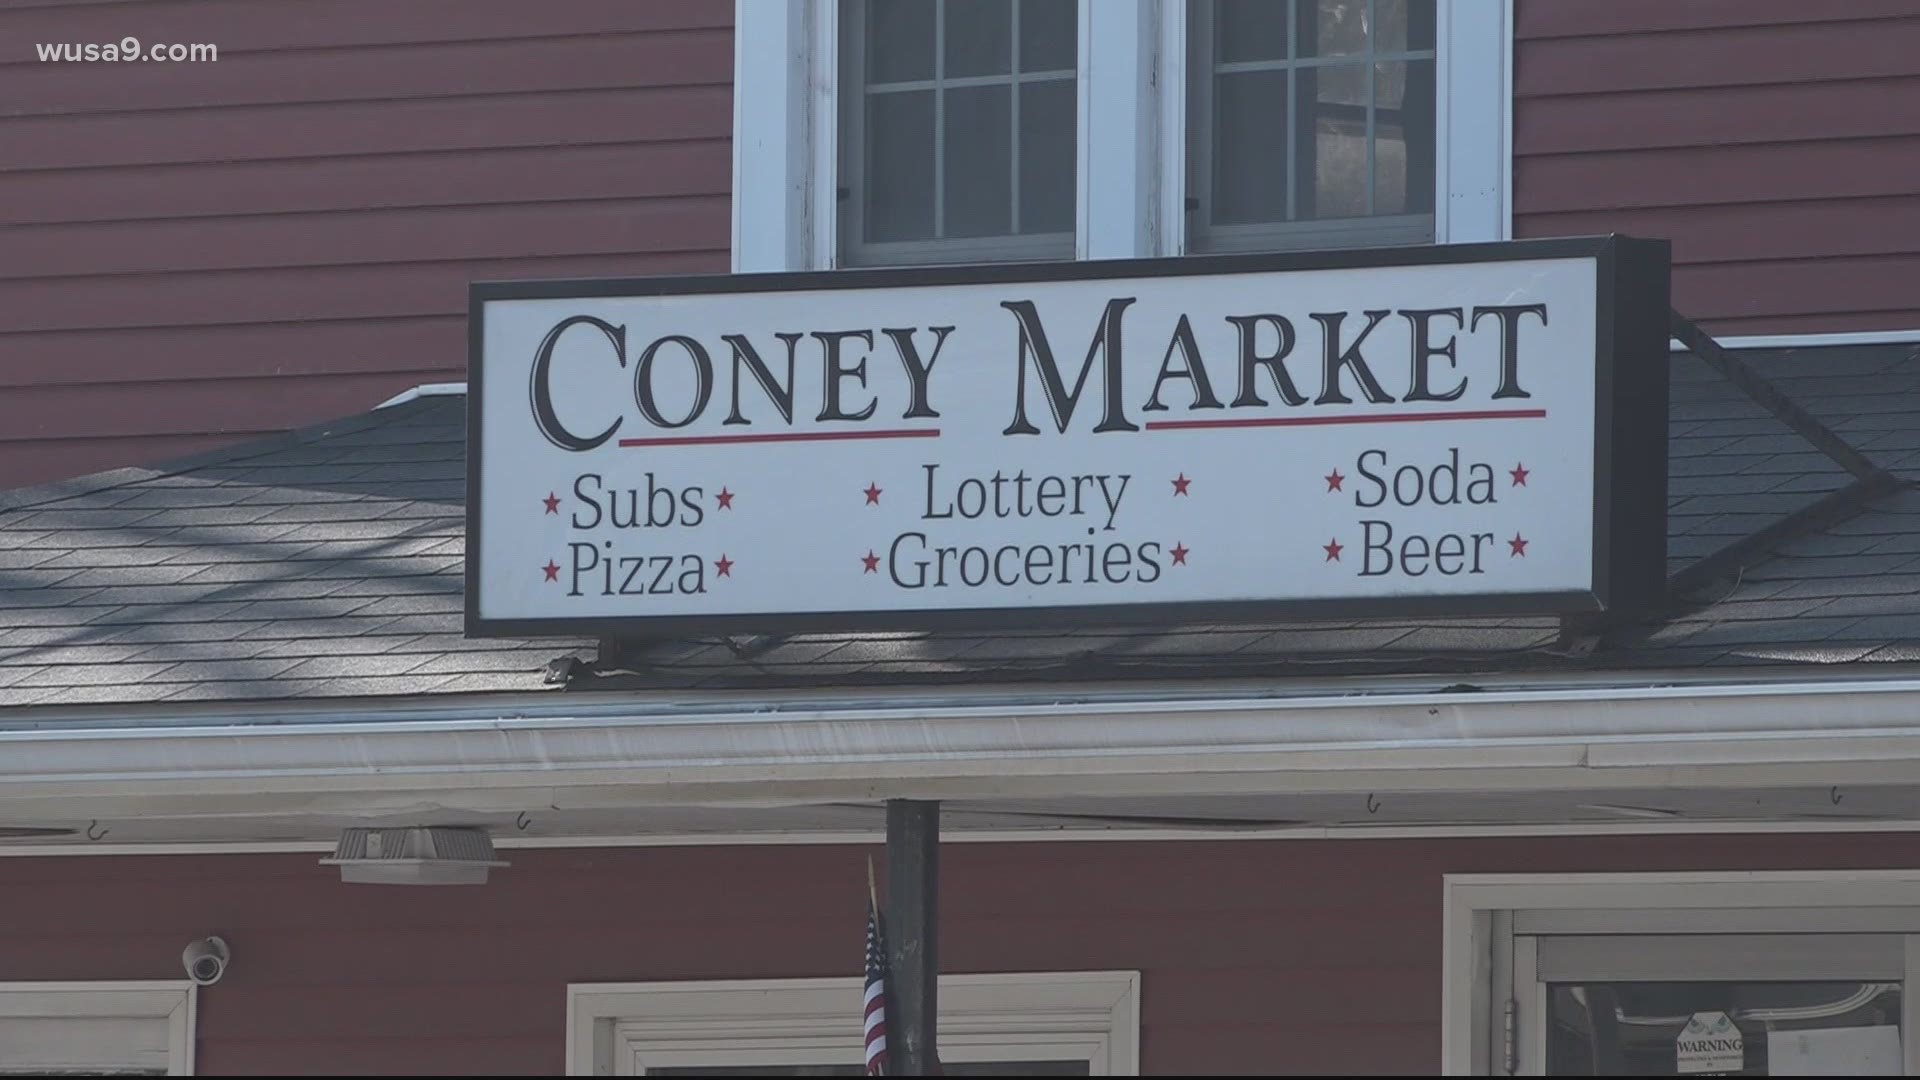 The town of Lonaconning, Maryland has been hard hit by coal mine closures and job losses but the lottery winner has come up some very good luck.